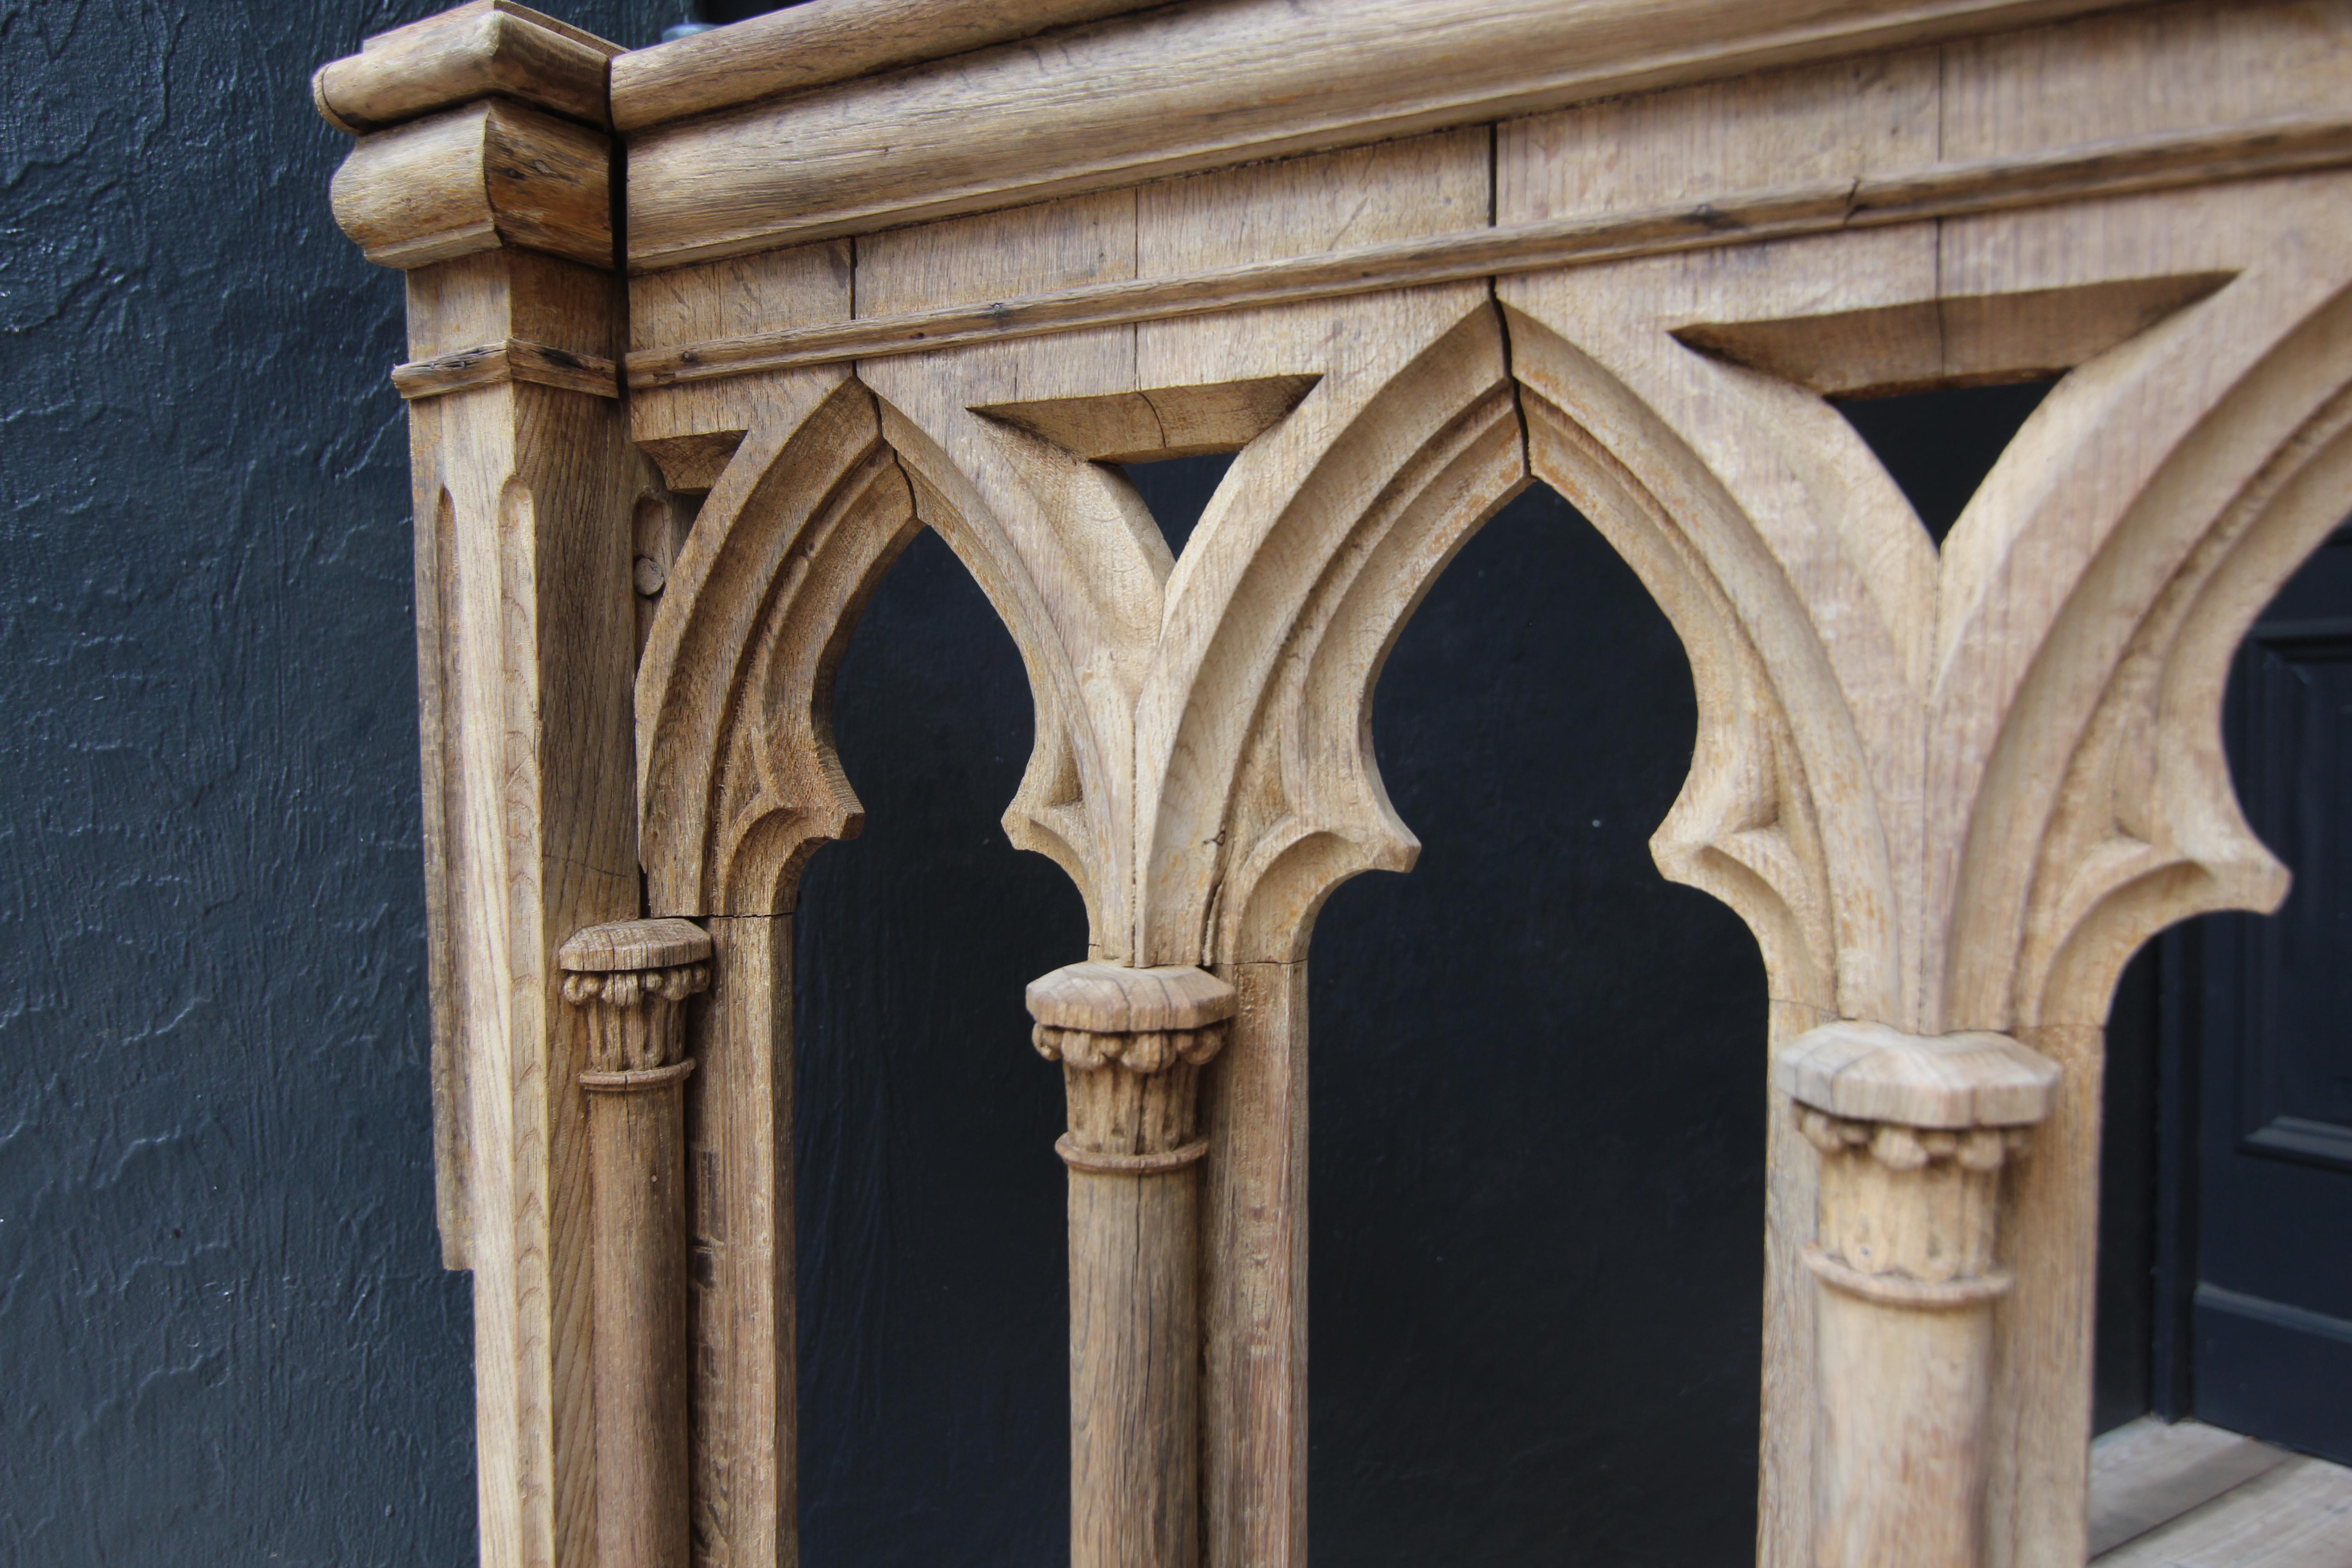 Late 19th Century Gothic Revival Oak Balustrade with Entry 4